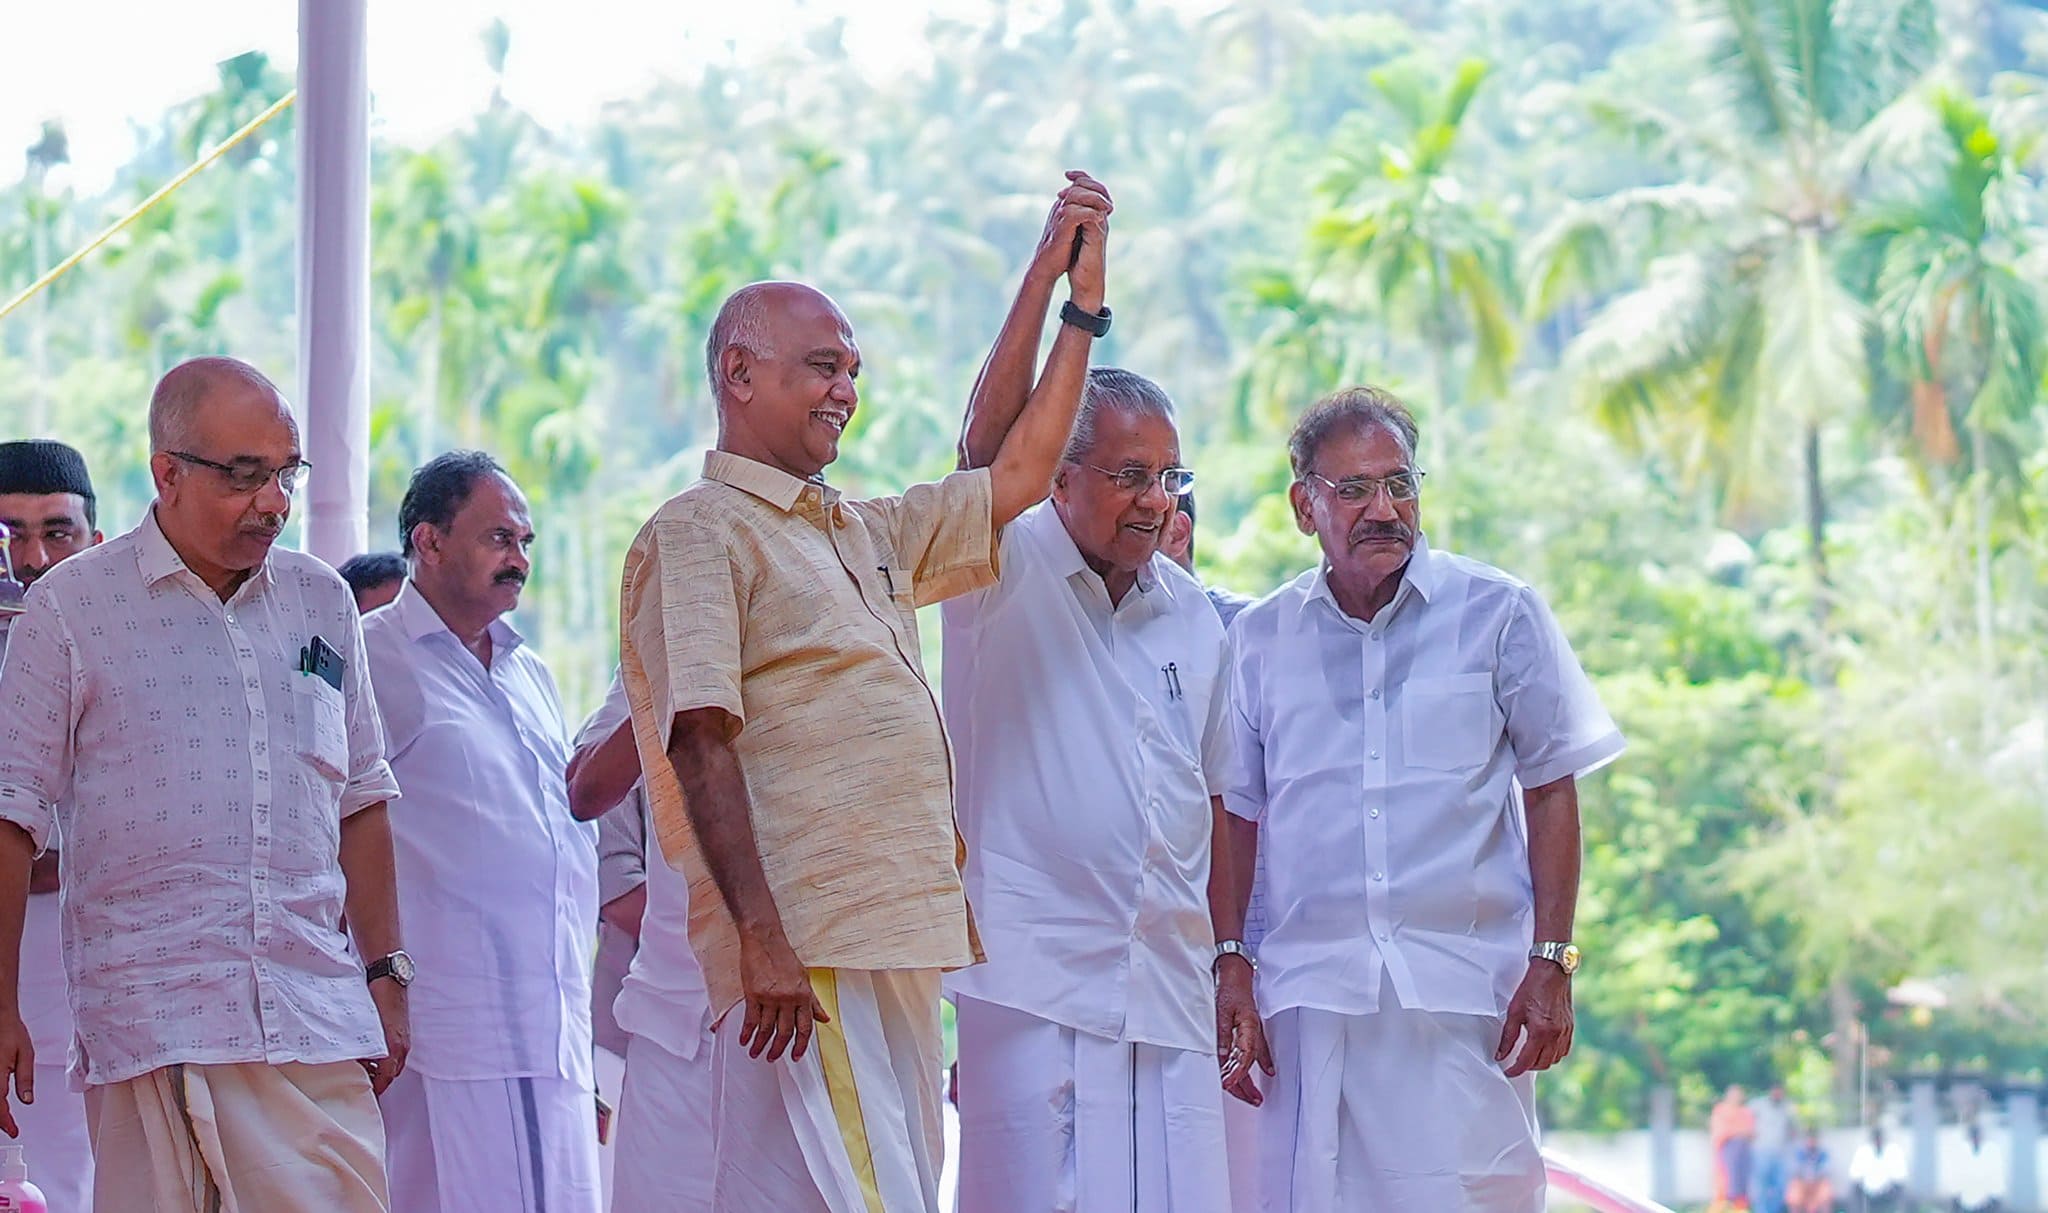 UDF MPs failed to uphold state’s interest in Parliament: Kerala CM